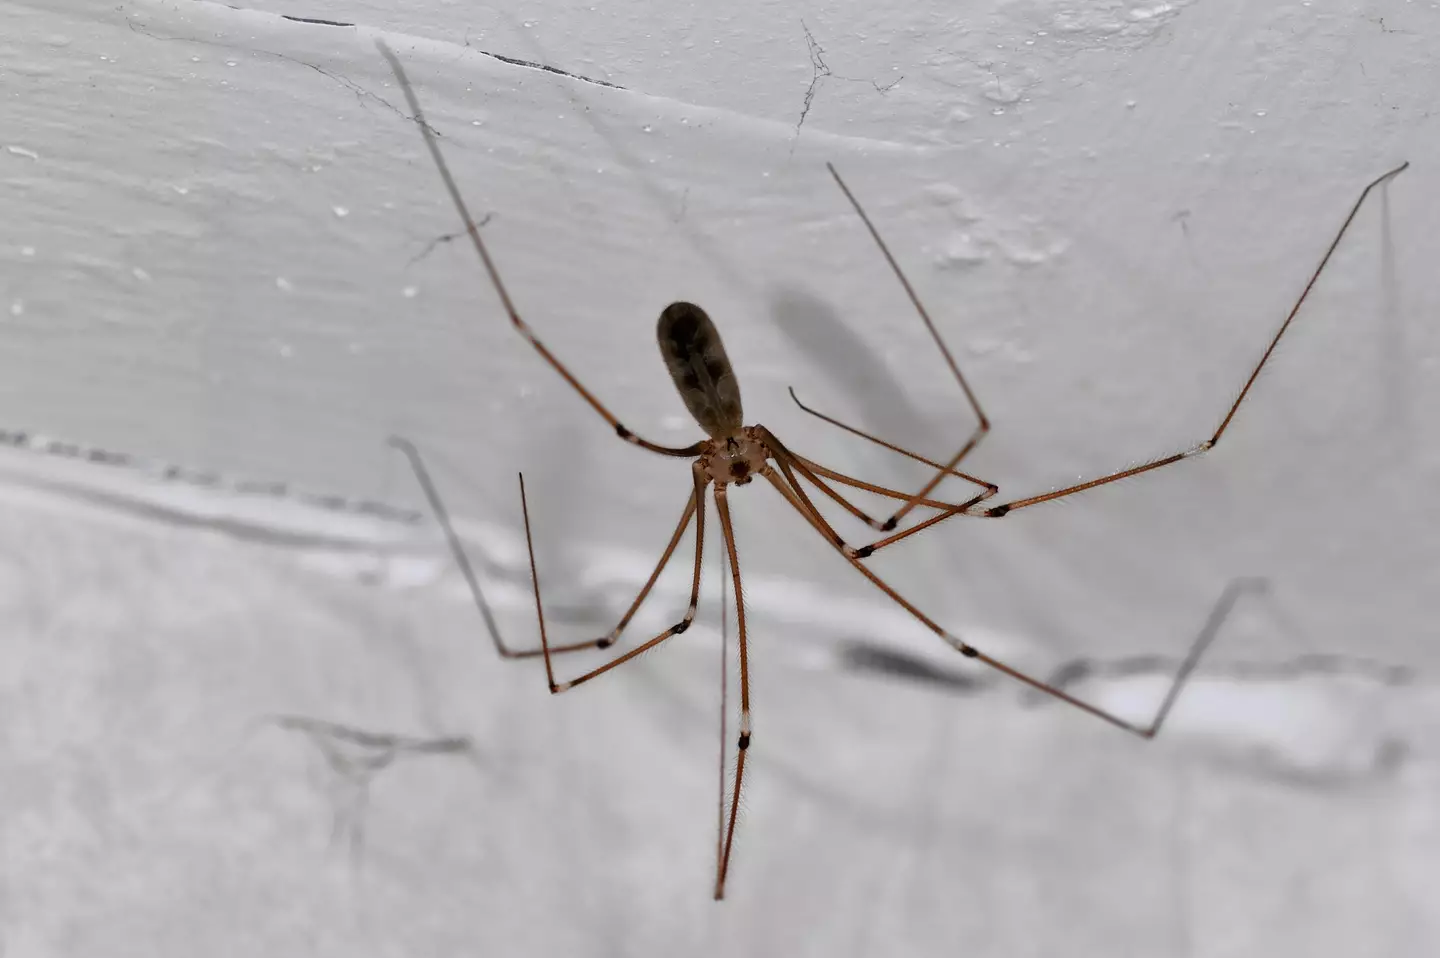 The cellar spider, another creepy crawly we refer to as a daddy long legs.